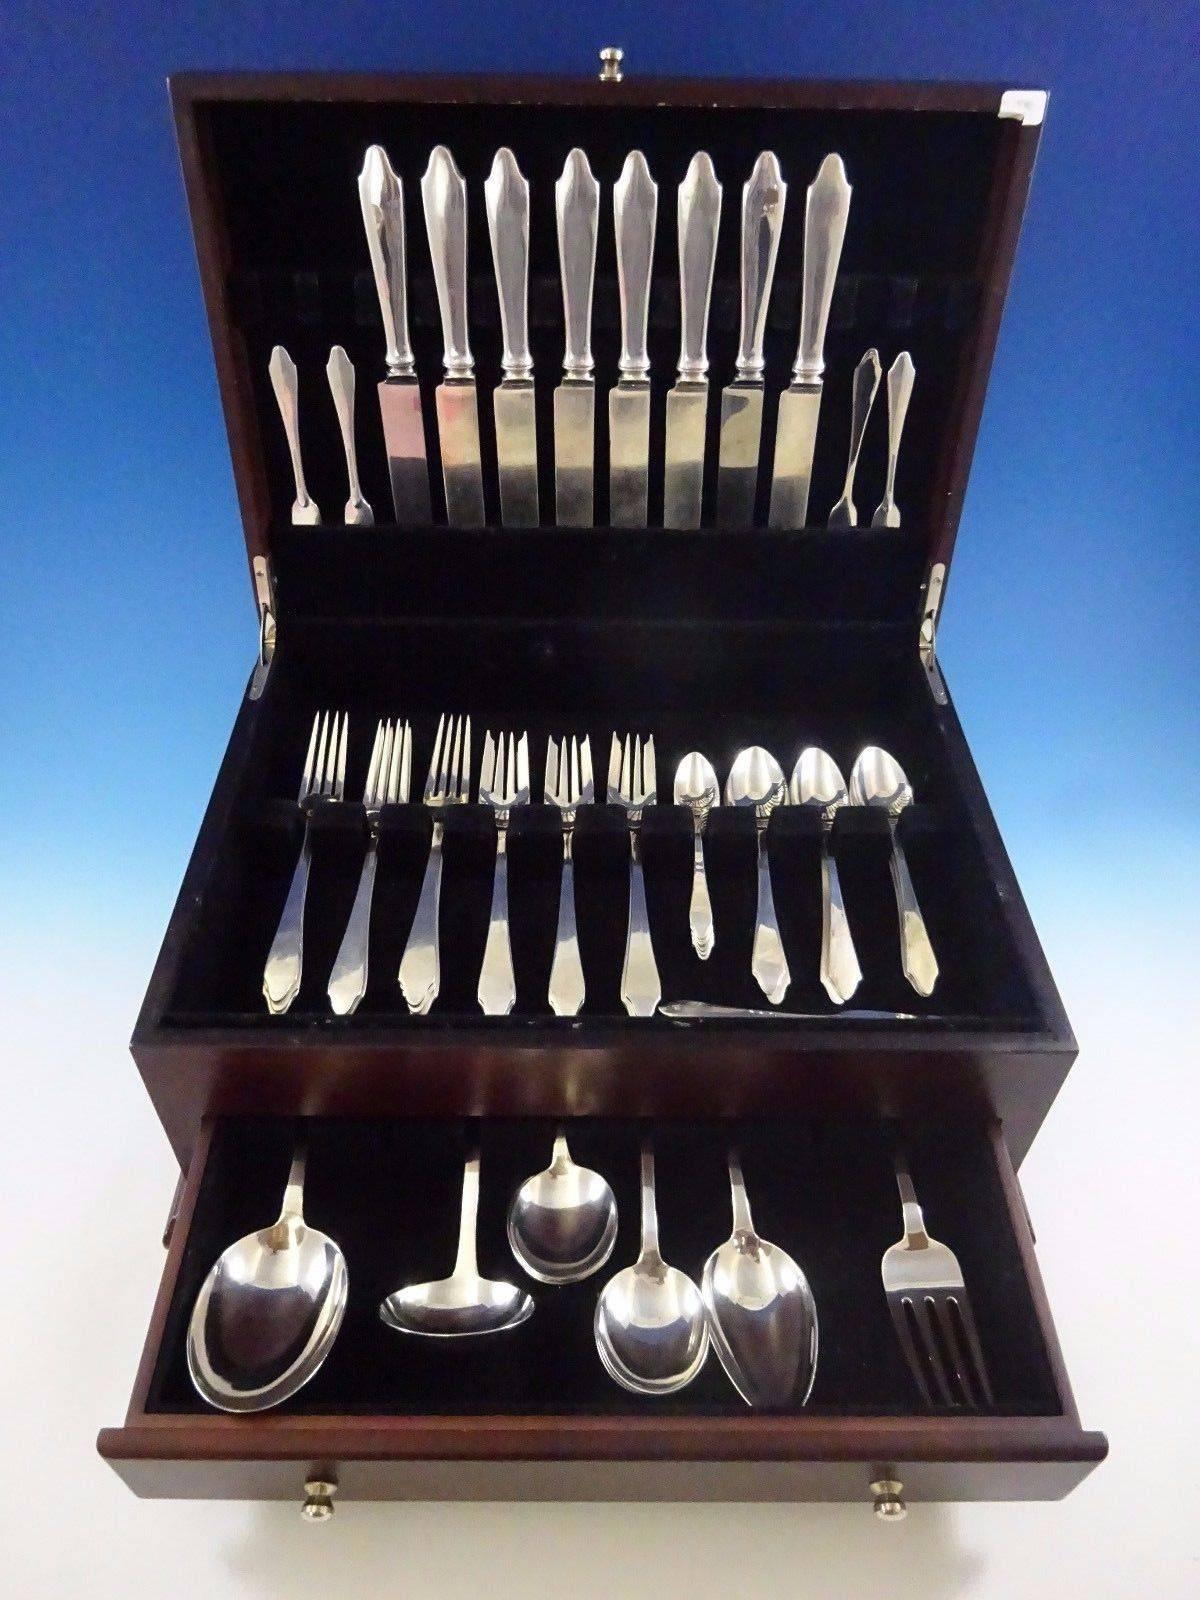 Clinton by Tiffany & Co. sterling silver flatware set - 60 pieces. This pattern has a fabulous, clean, & timeless design. This set includes: 

eight knives, 9 1/4